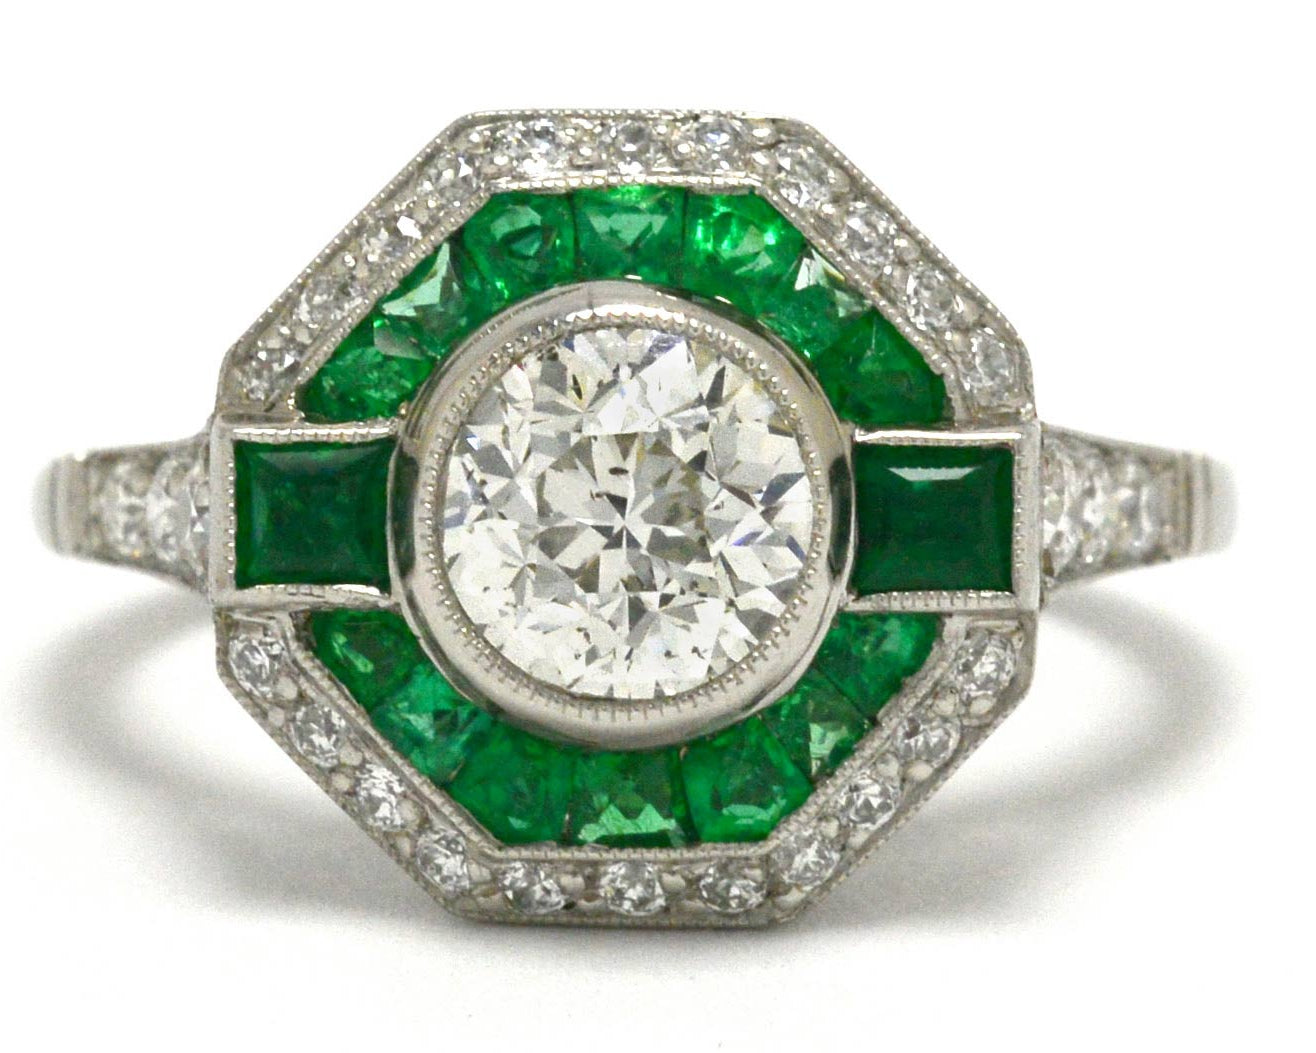 A unique octagon Art Deco diamond engagement ring with an emerald halo.